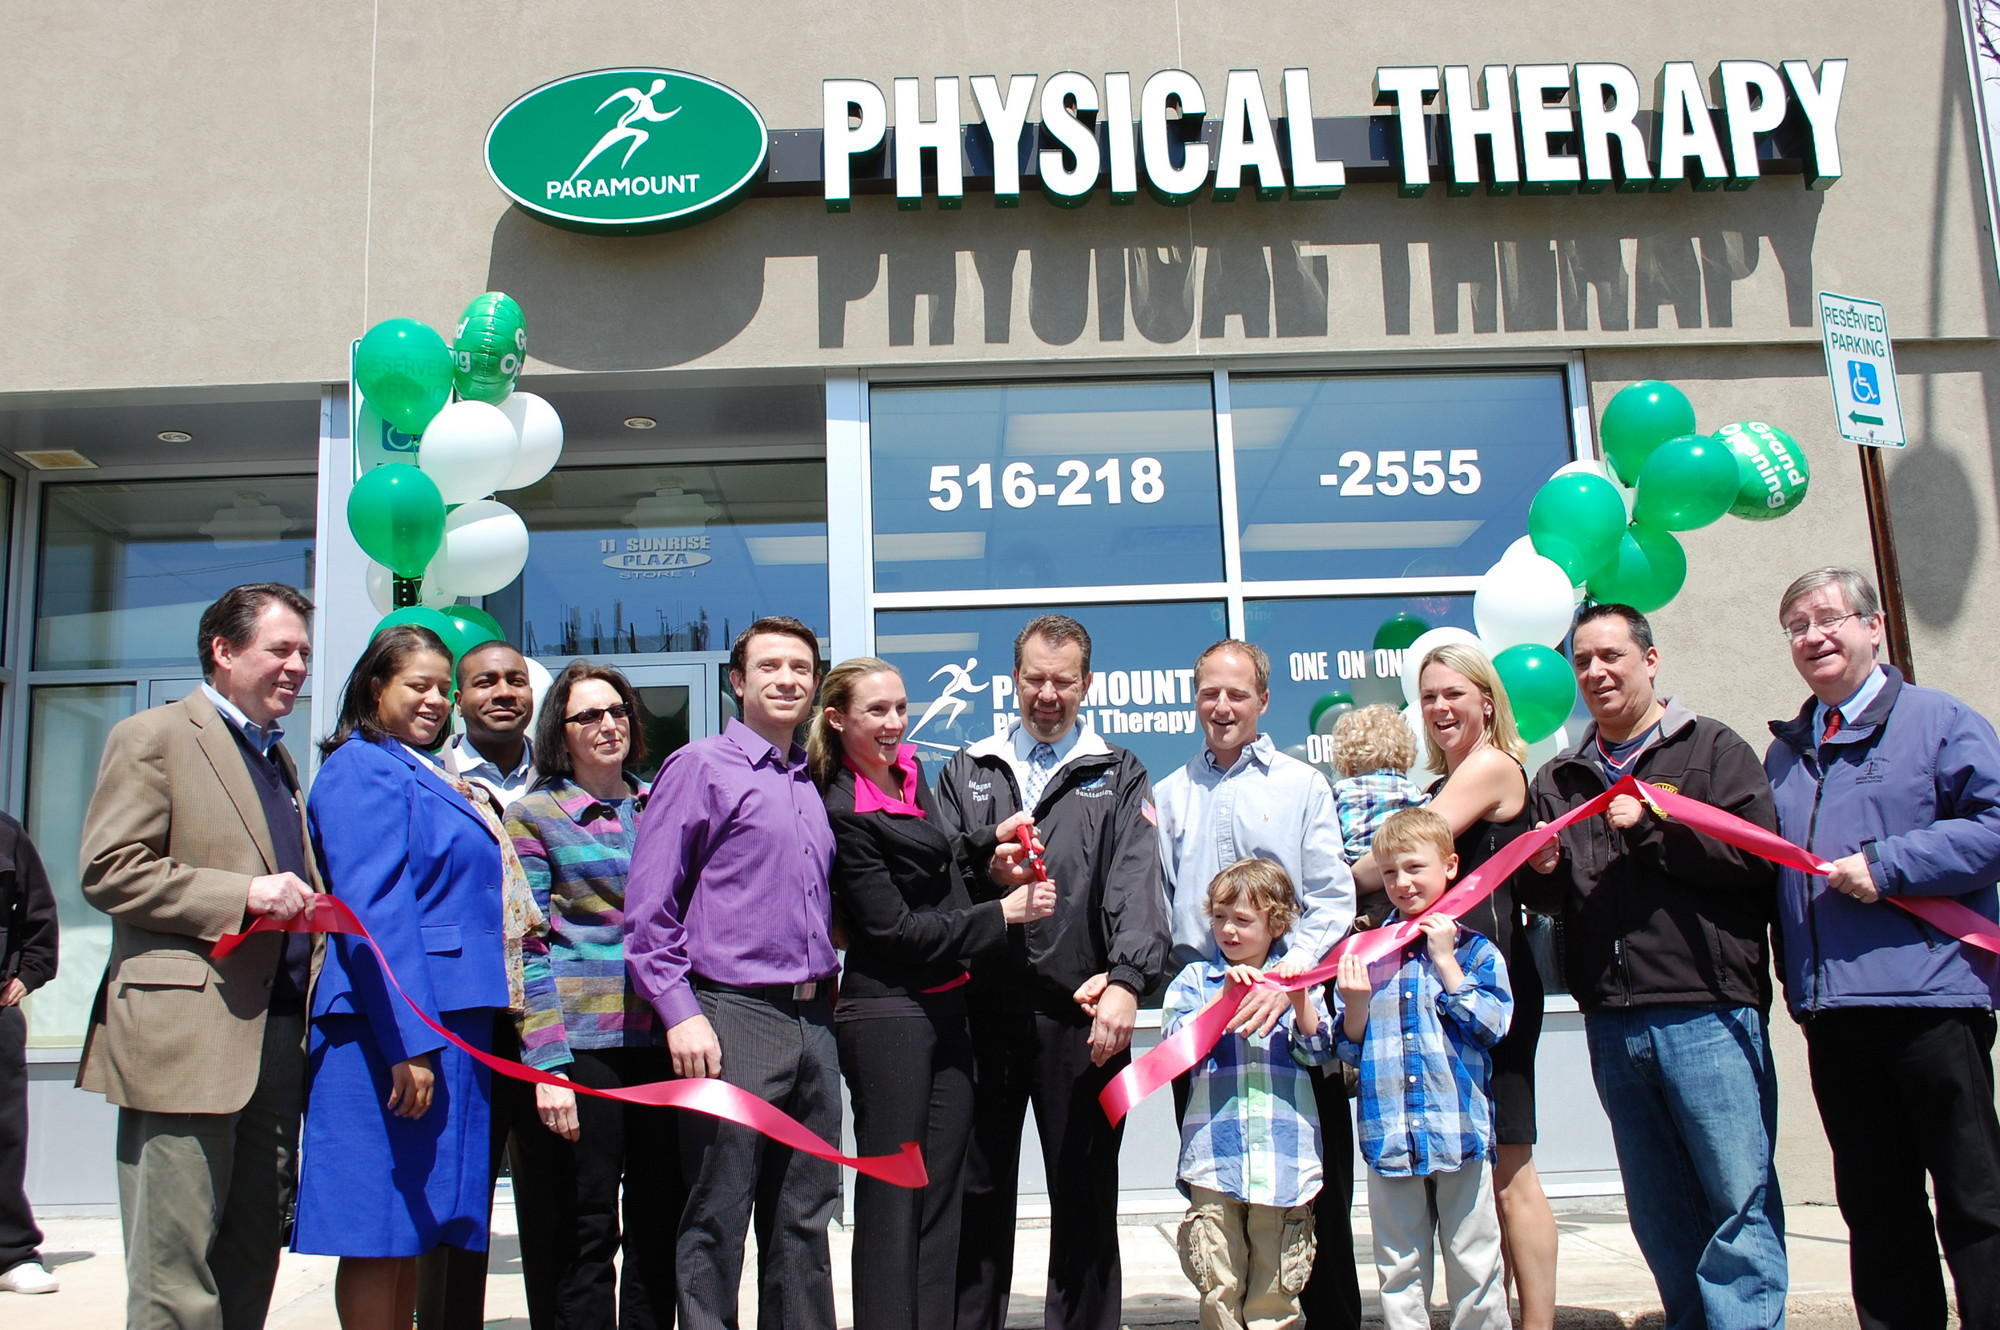 Paramount Physical Therapy on Sunrise Plaza celebrating it’s grand opening with a ribbon-cutting ceremony on April 13.